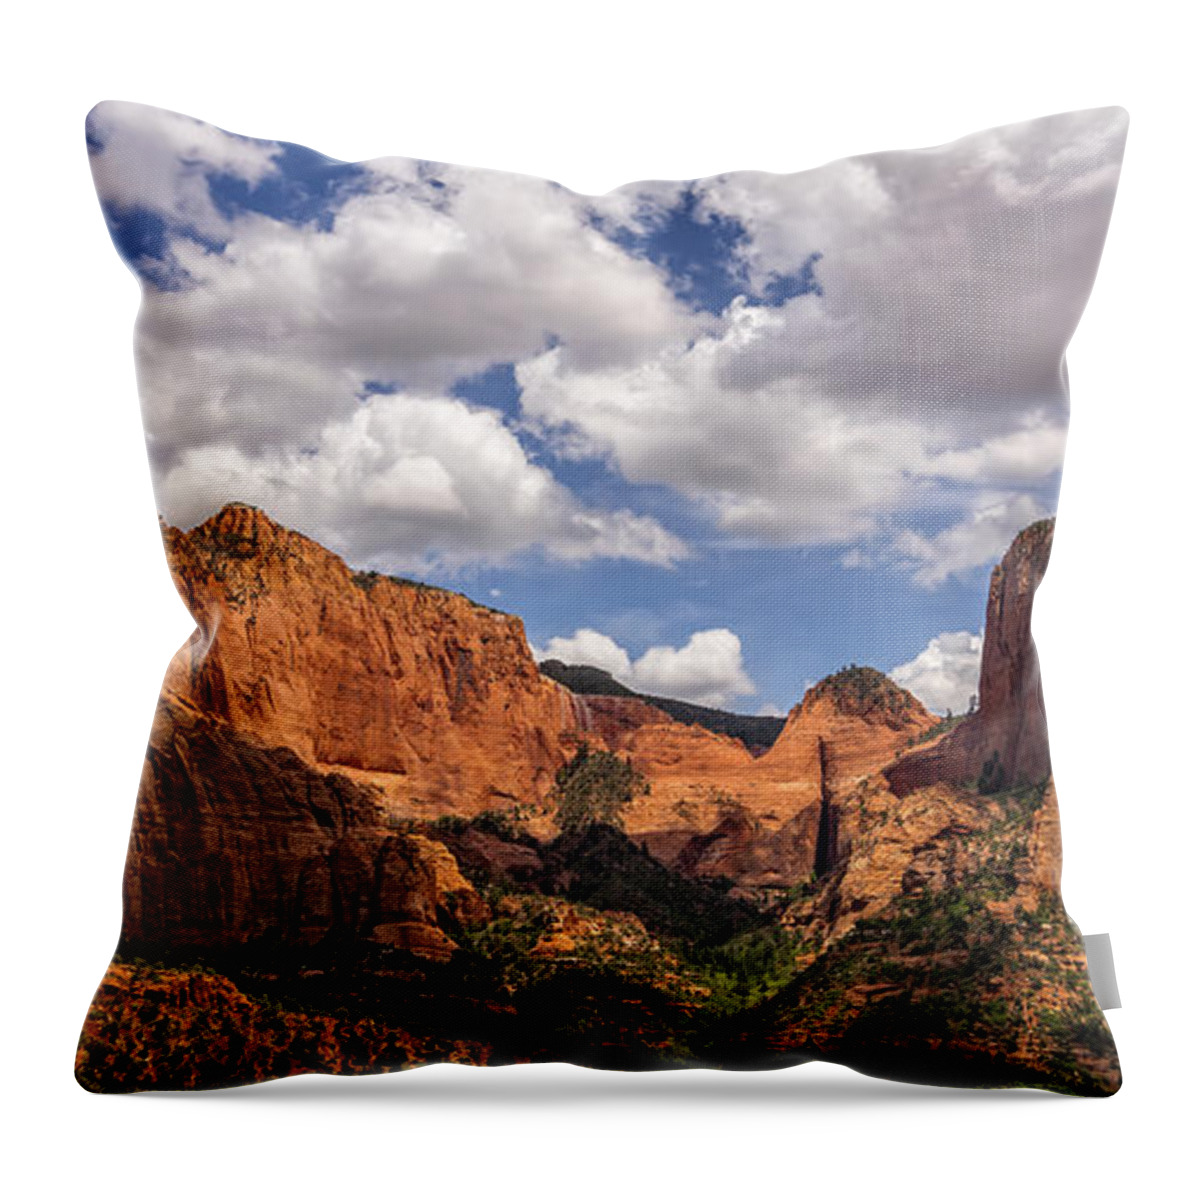 Kolob Canyon Throw Pillow featuring the photograph Kolob Canyon Zion National Park by Steve L'Italien